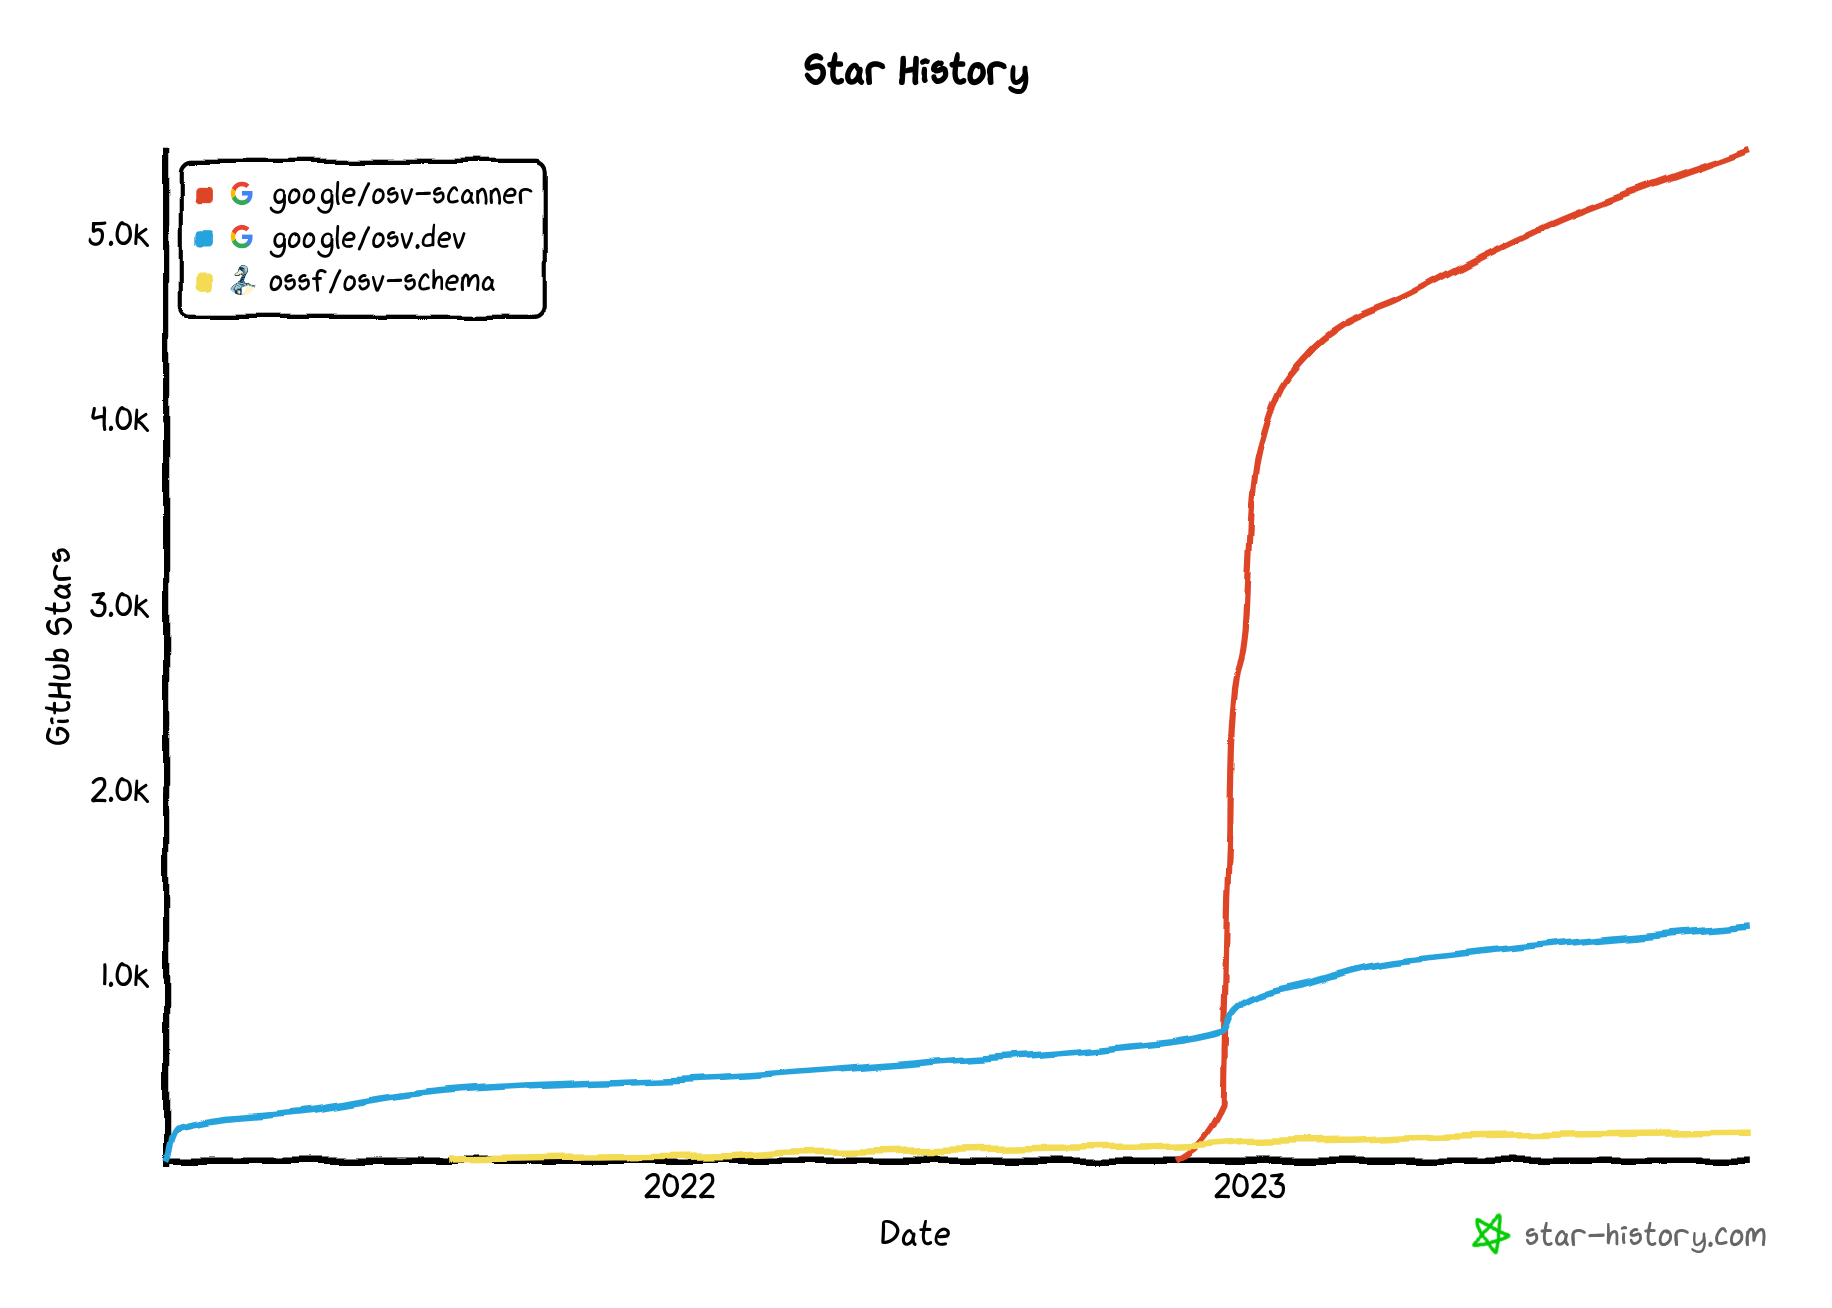 Image shows the GitHub star history for all OSV-related GitHub repositories taken at November 17, 2023. osv-schema has approximately 150 stars, osv.dev has approximately 1,300 stars, and osv-scanner has approximately 5,400 stars.